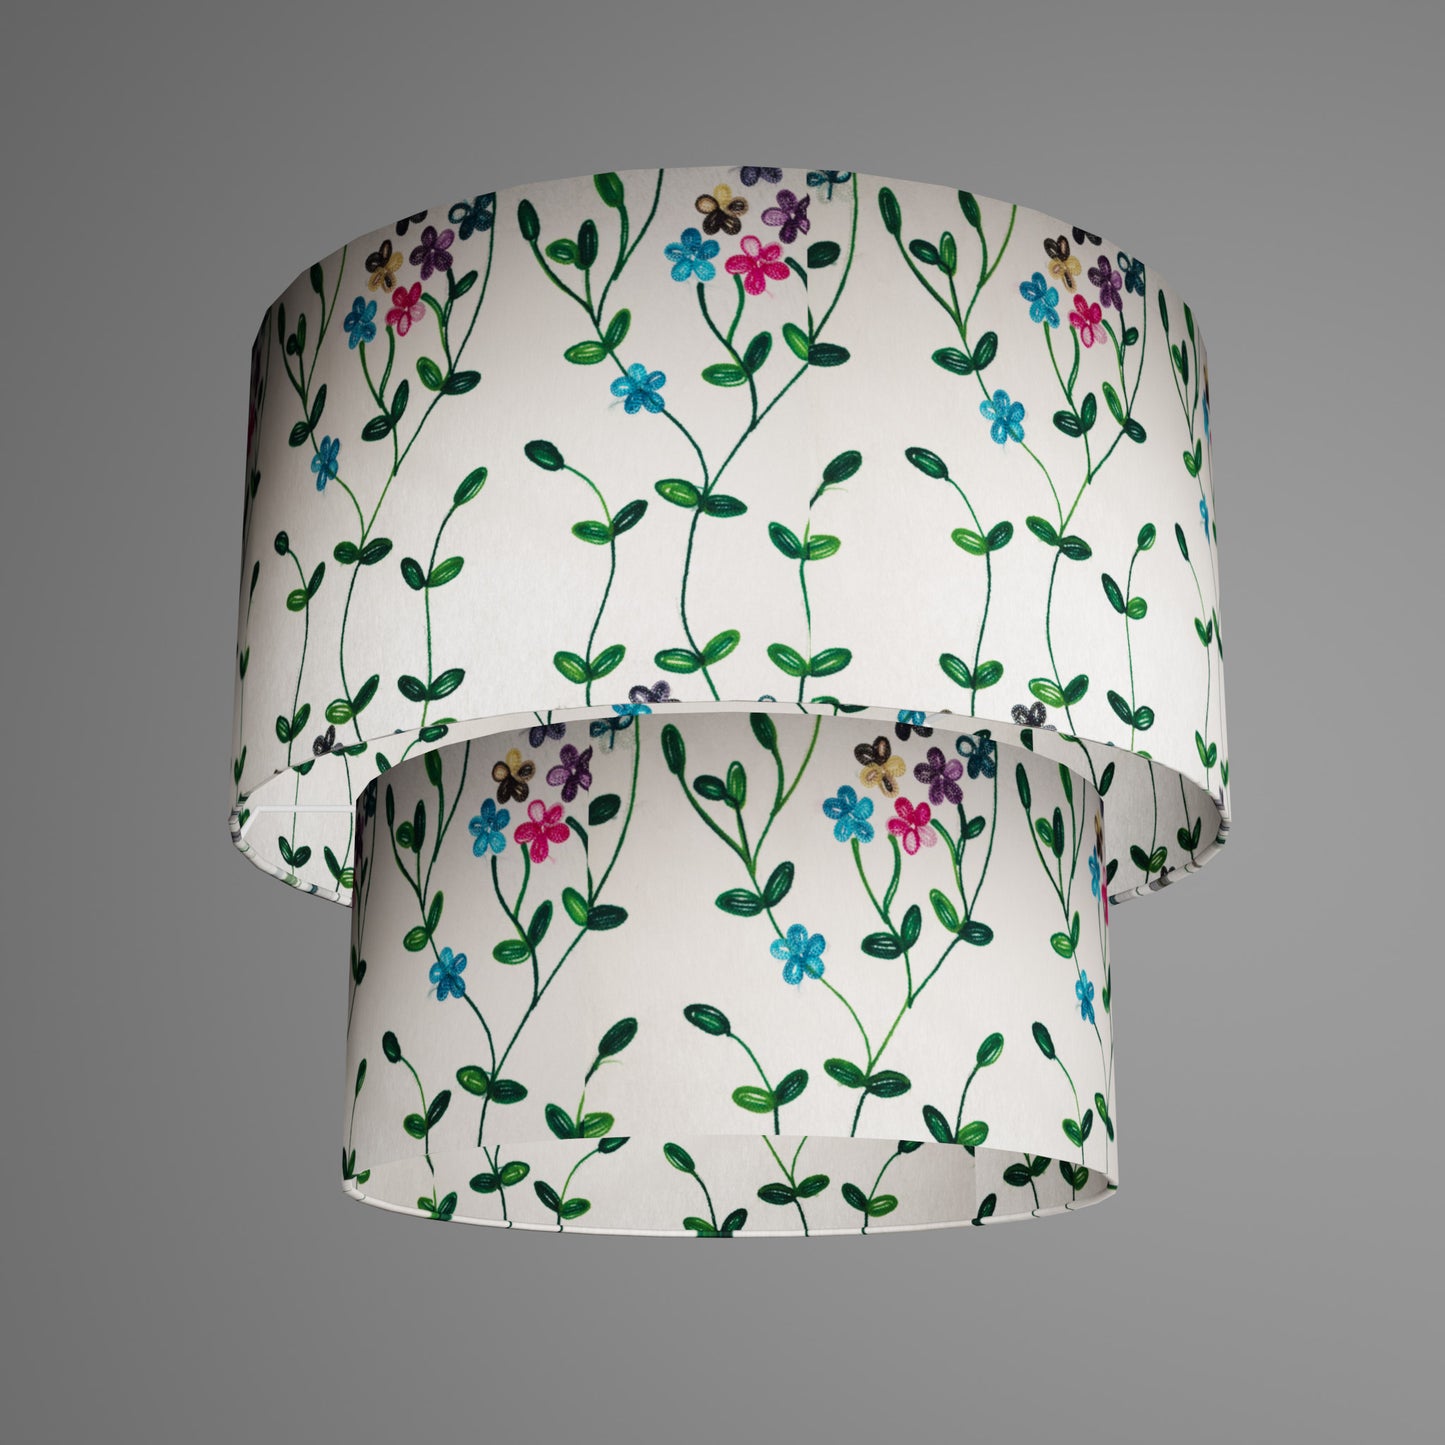 2 Tier Lamp Shade - P43 - Embroidered Flowers on White, 40cm x 20cm & 30cm x 15cm